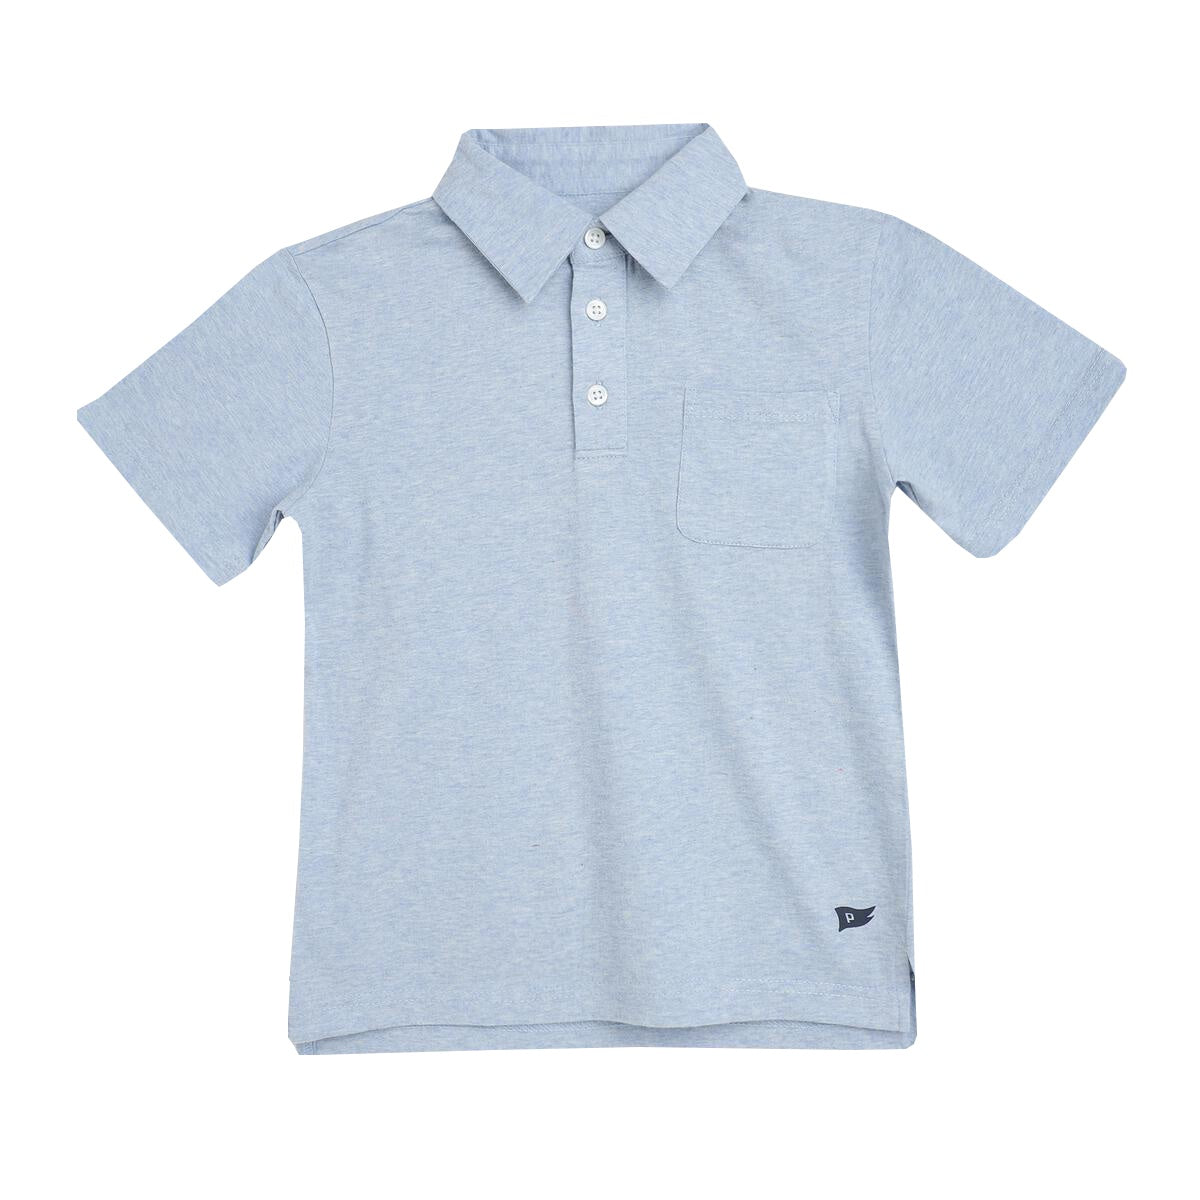 Pedal Performance Heather Polo 33168